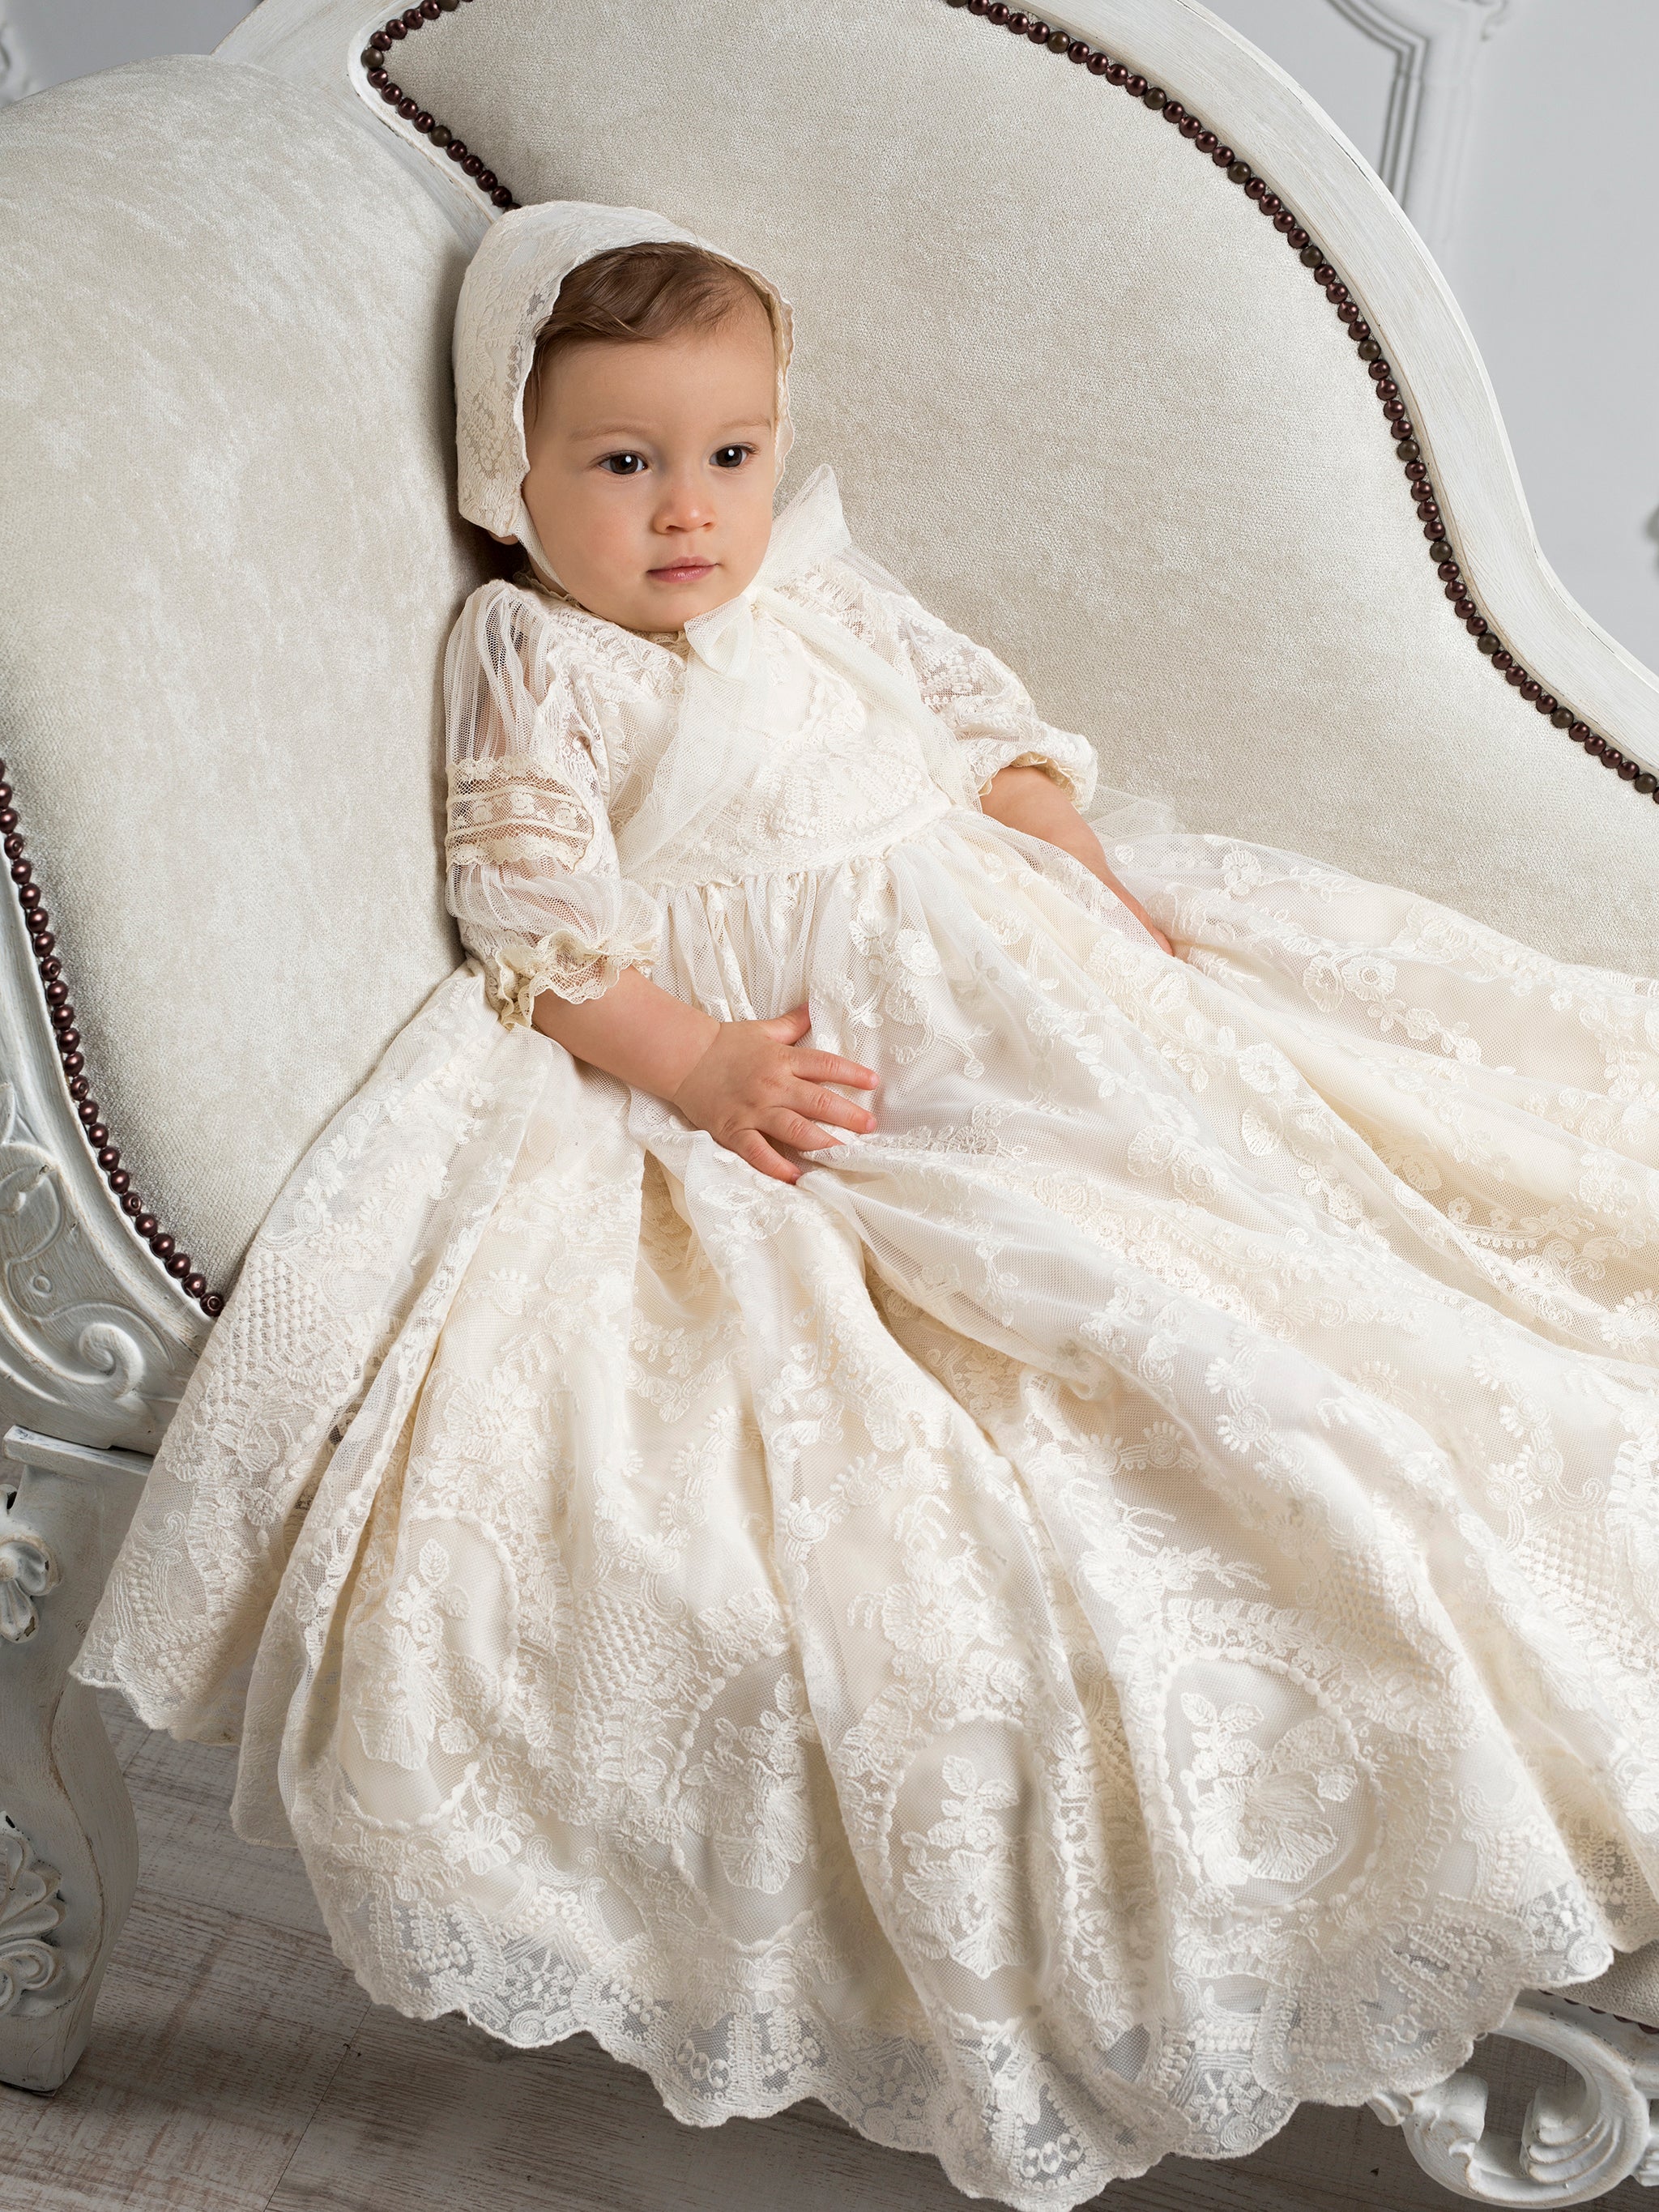 Tara Stunning Sequined Beaded Lace Christening Gown Baptism, 56% OFF